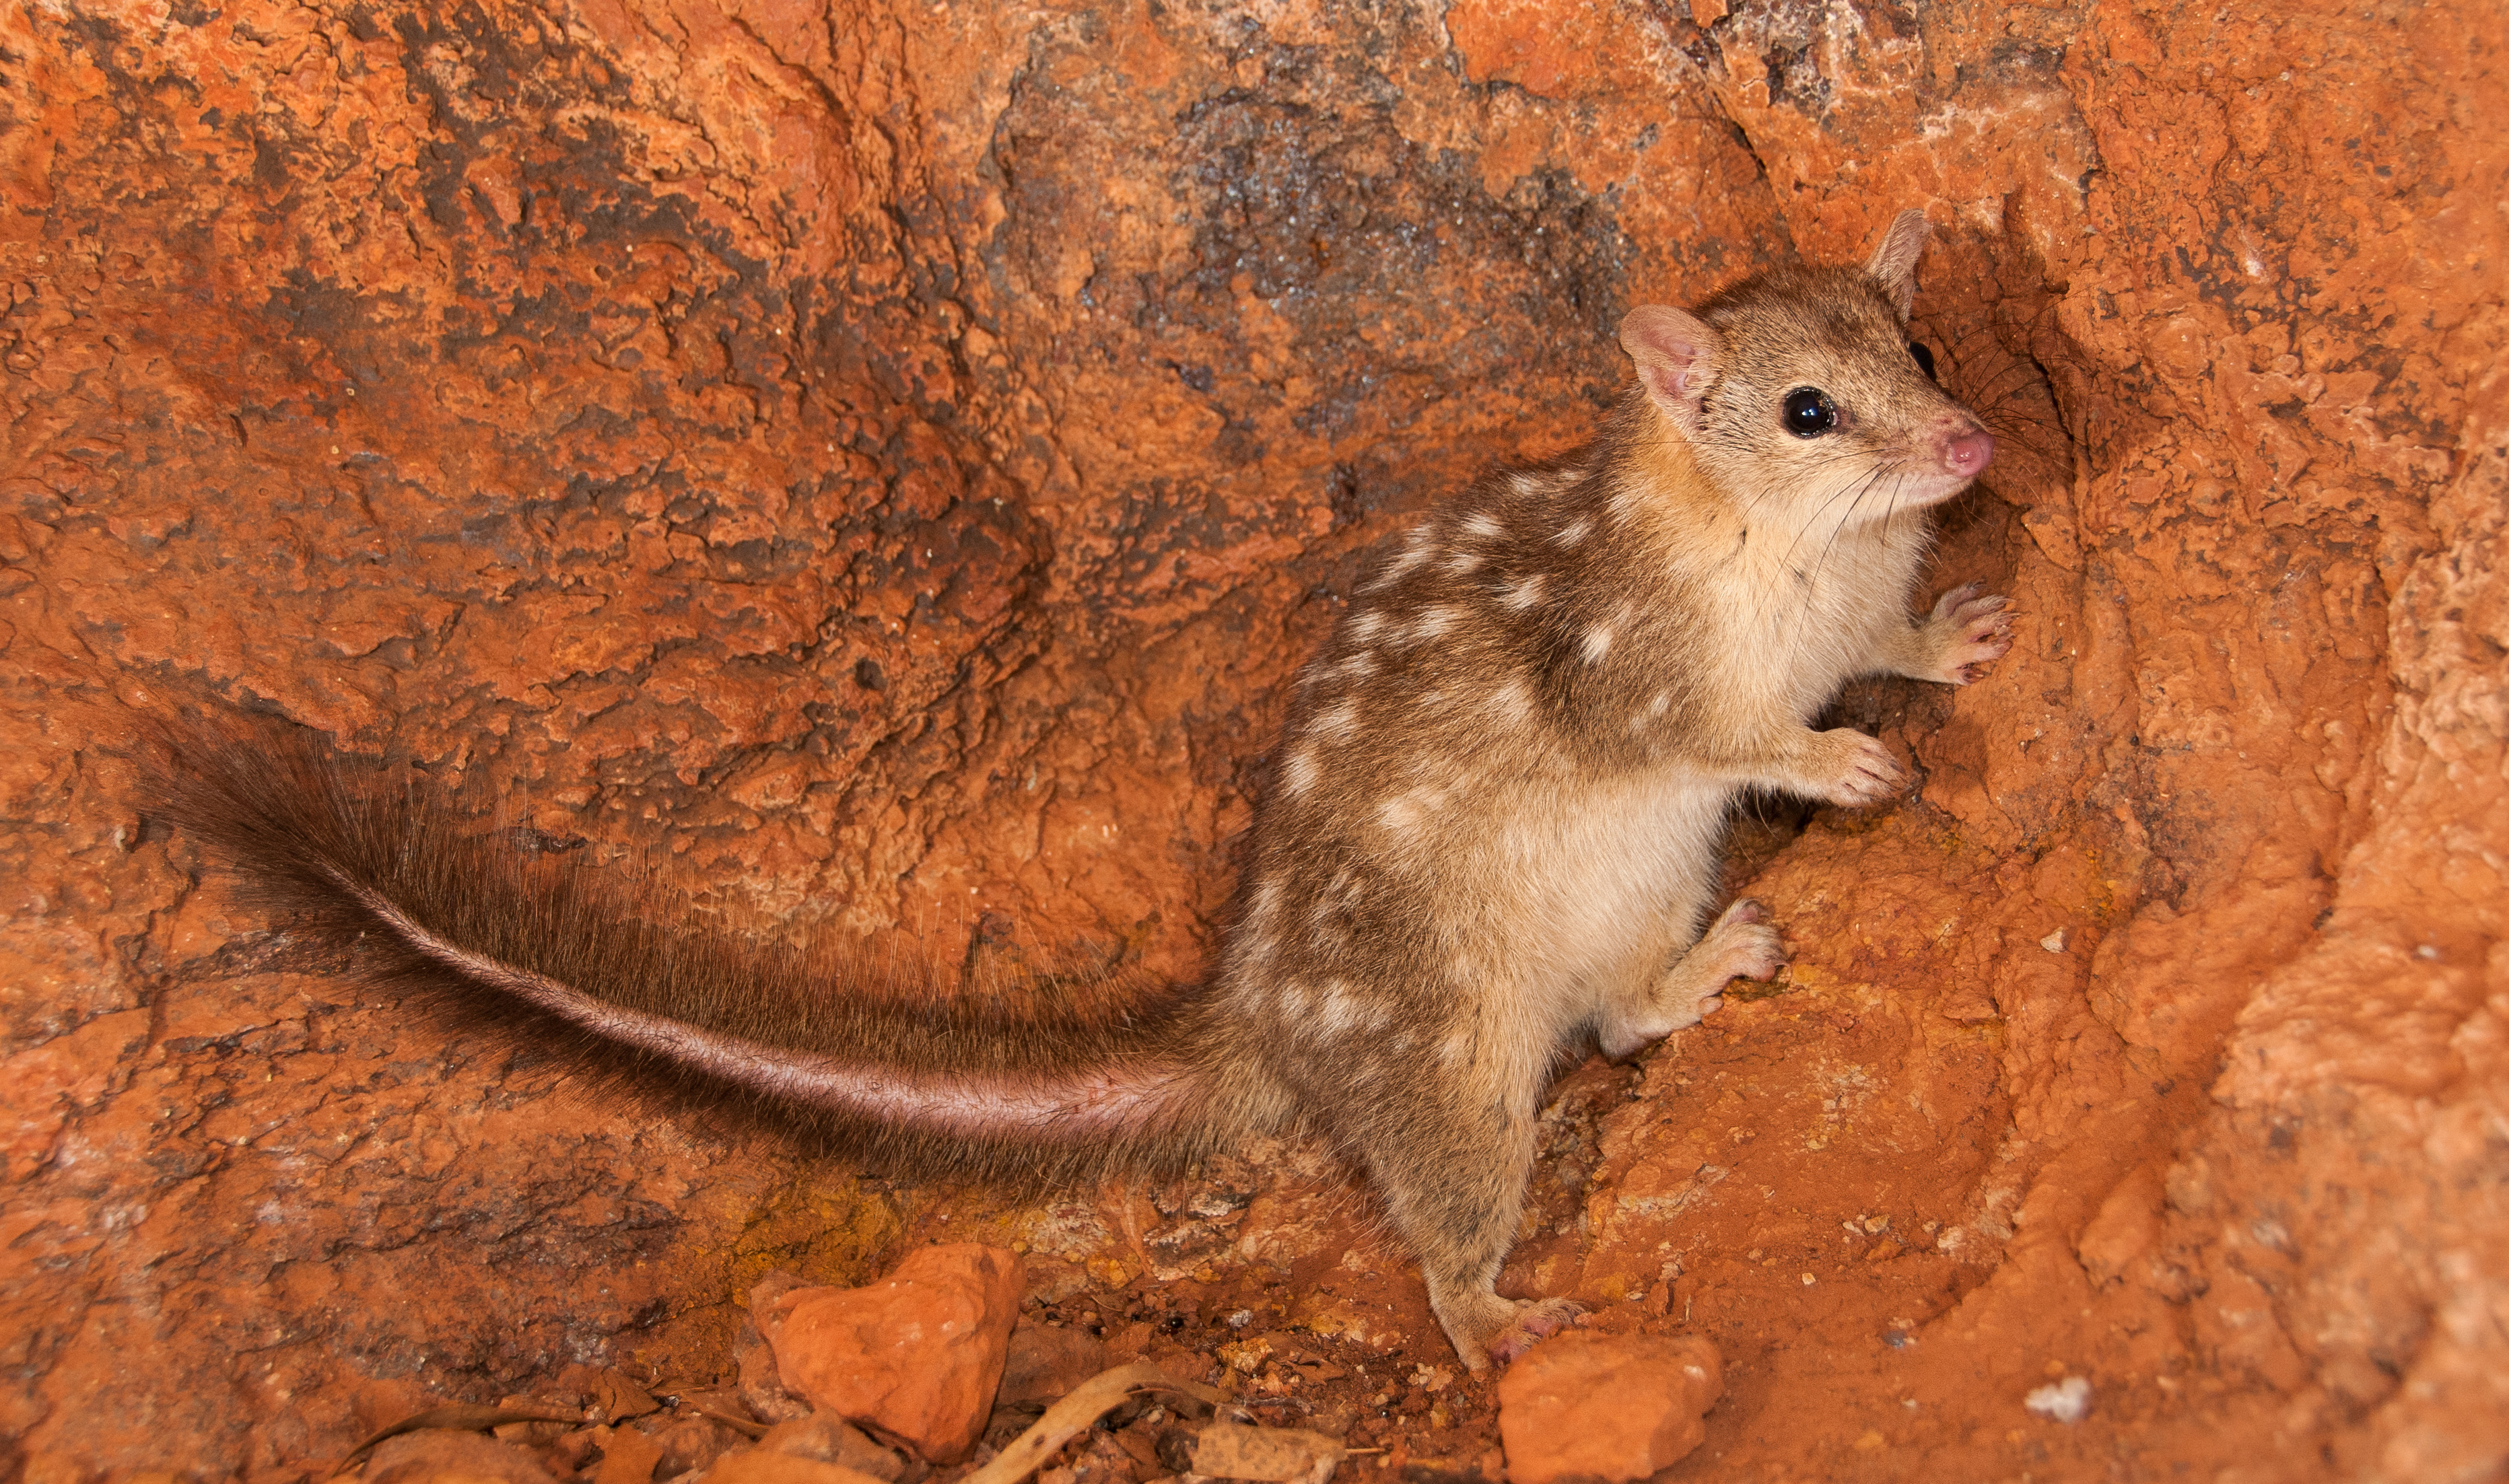 The Mitchell Plateau is home to many of Australia’s endangered species, such as the northern quoll, and is the only place in the country that has not experienced mammal extinctions.